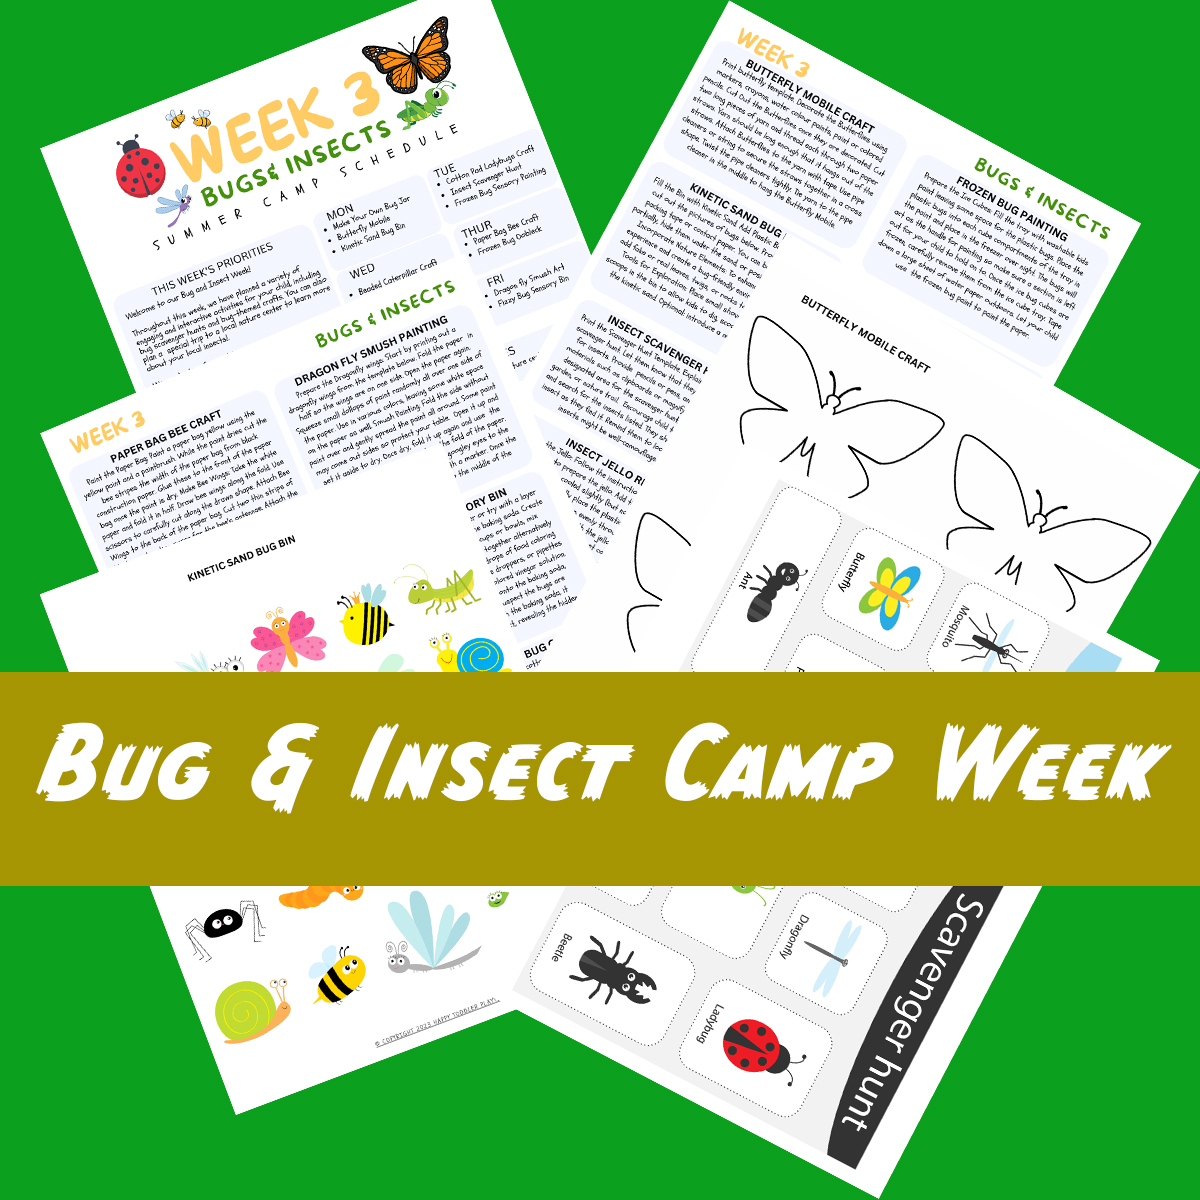 Bug & Insect Camp Week